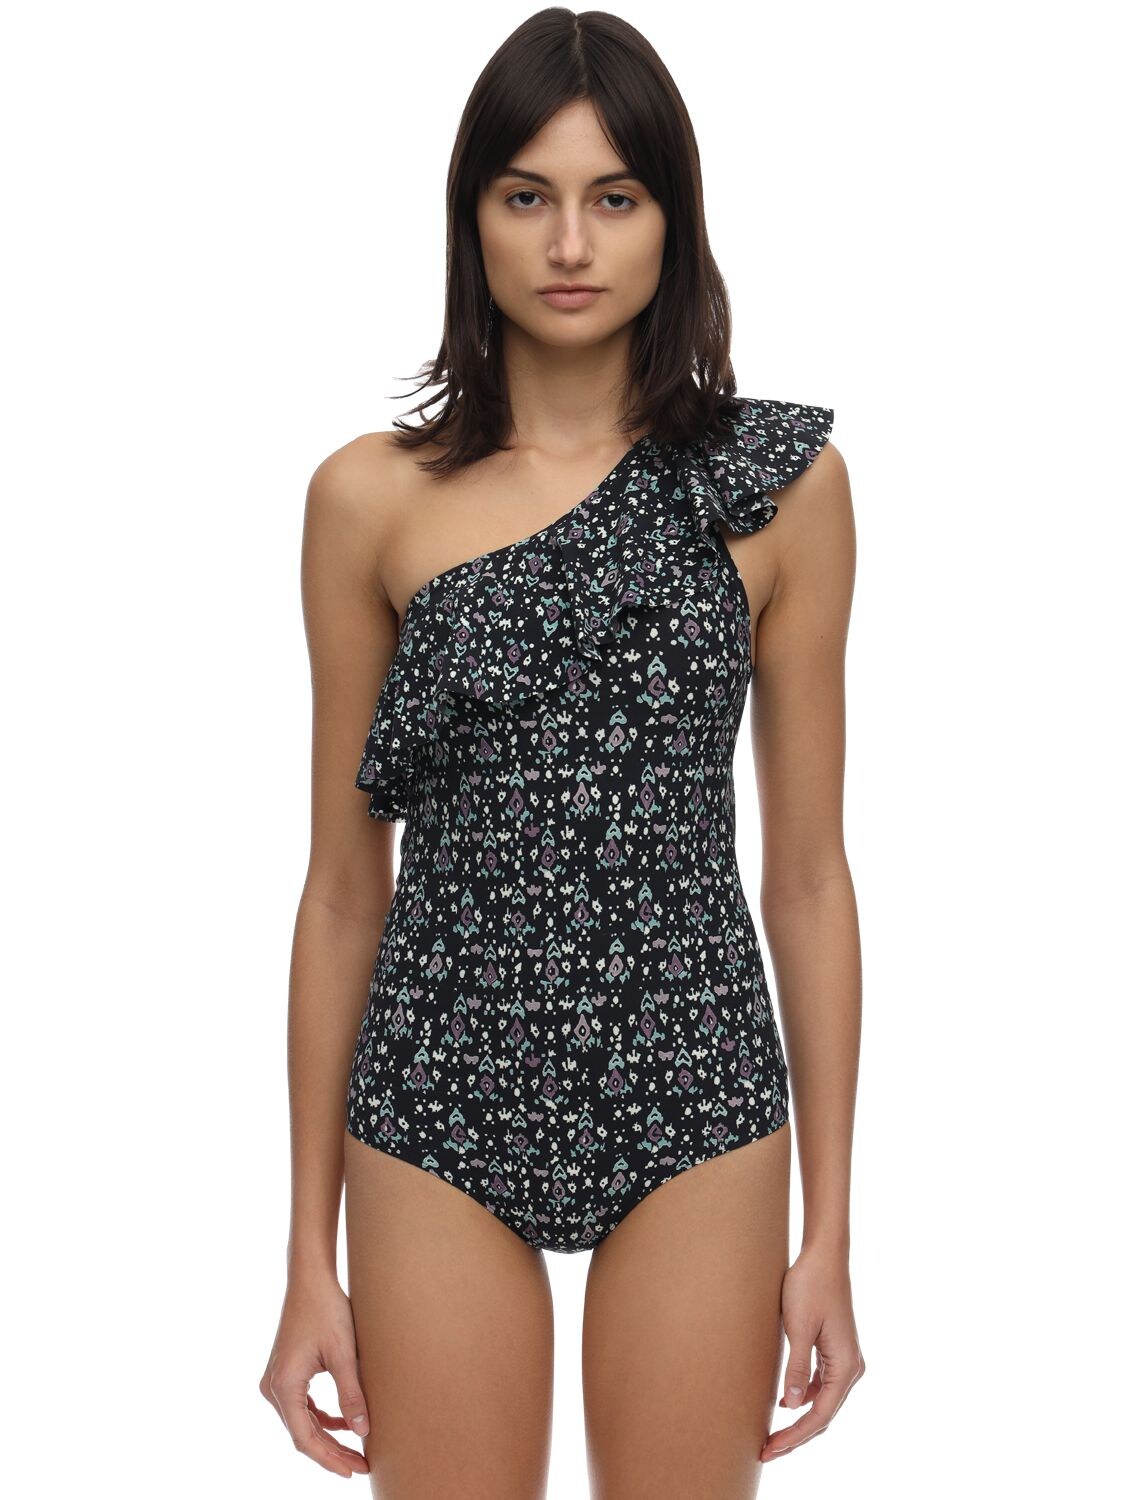 ISABEL MARANT ÉTOILE CECILIA PRINTED LYCRA ONE PIECE SWIMSUIT,71ICDC001-MZBETQ2